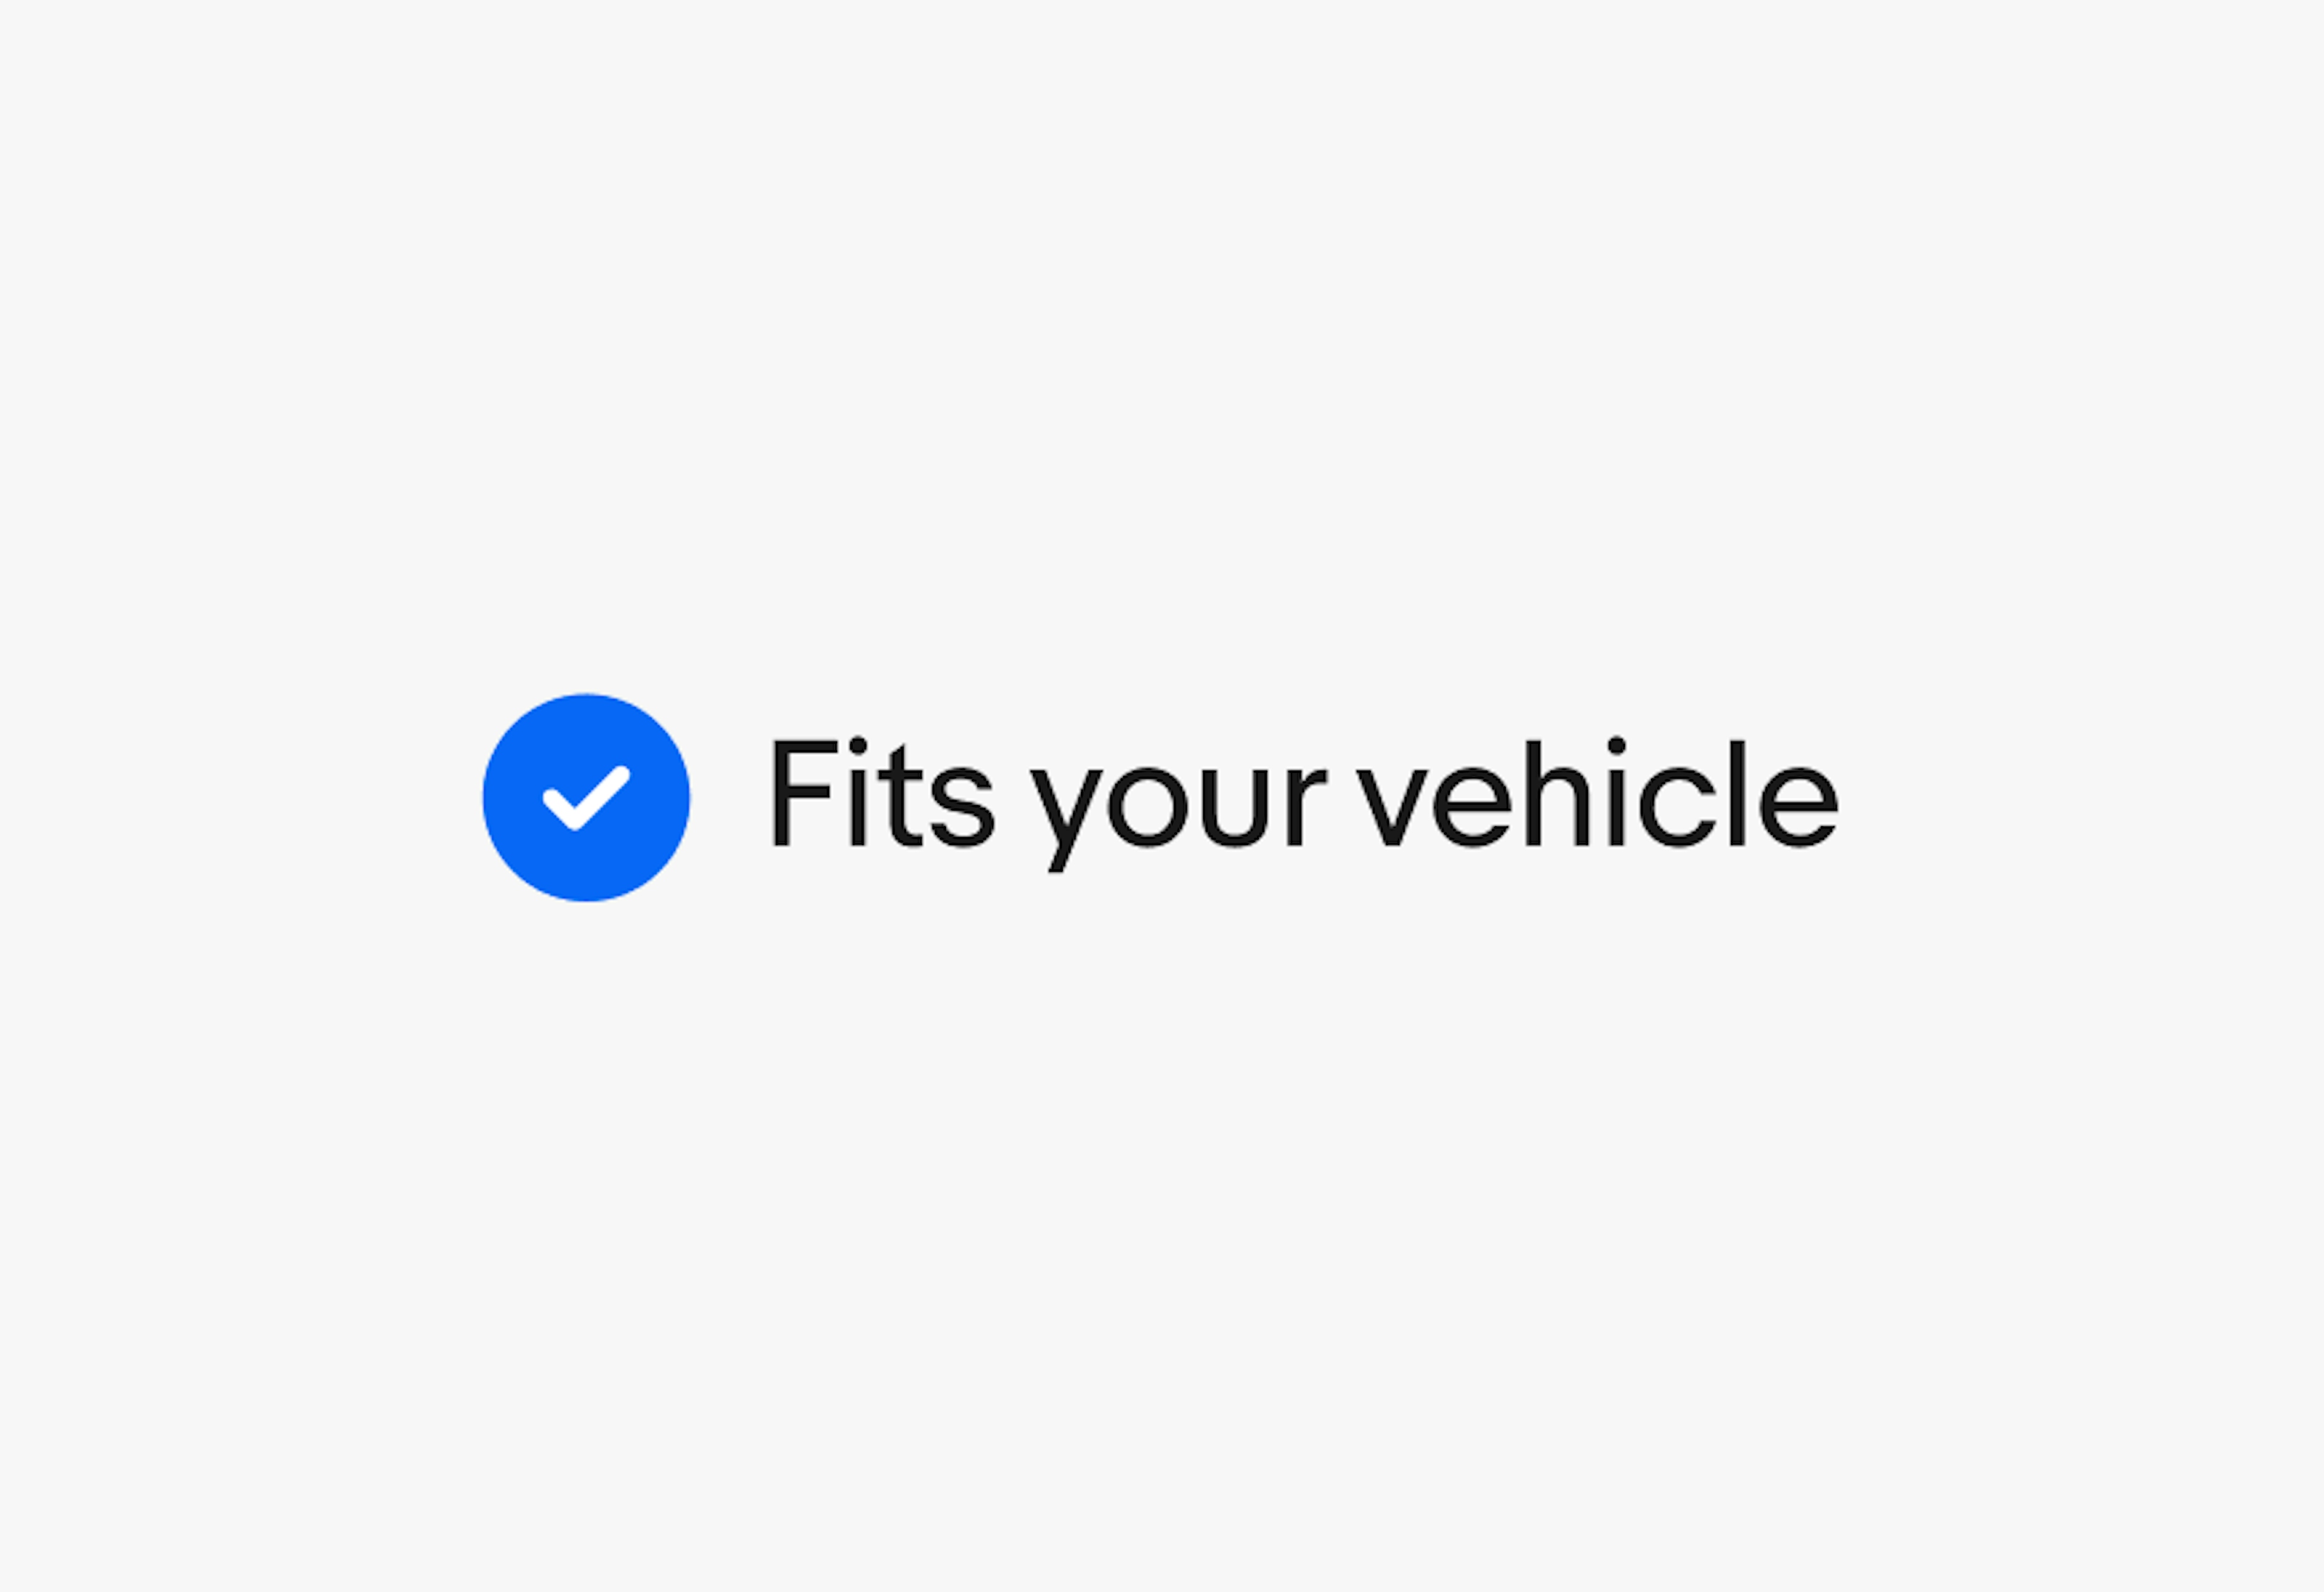 A blue filled confirmation checkmark icon next to the text “Fits your vehicle”.